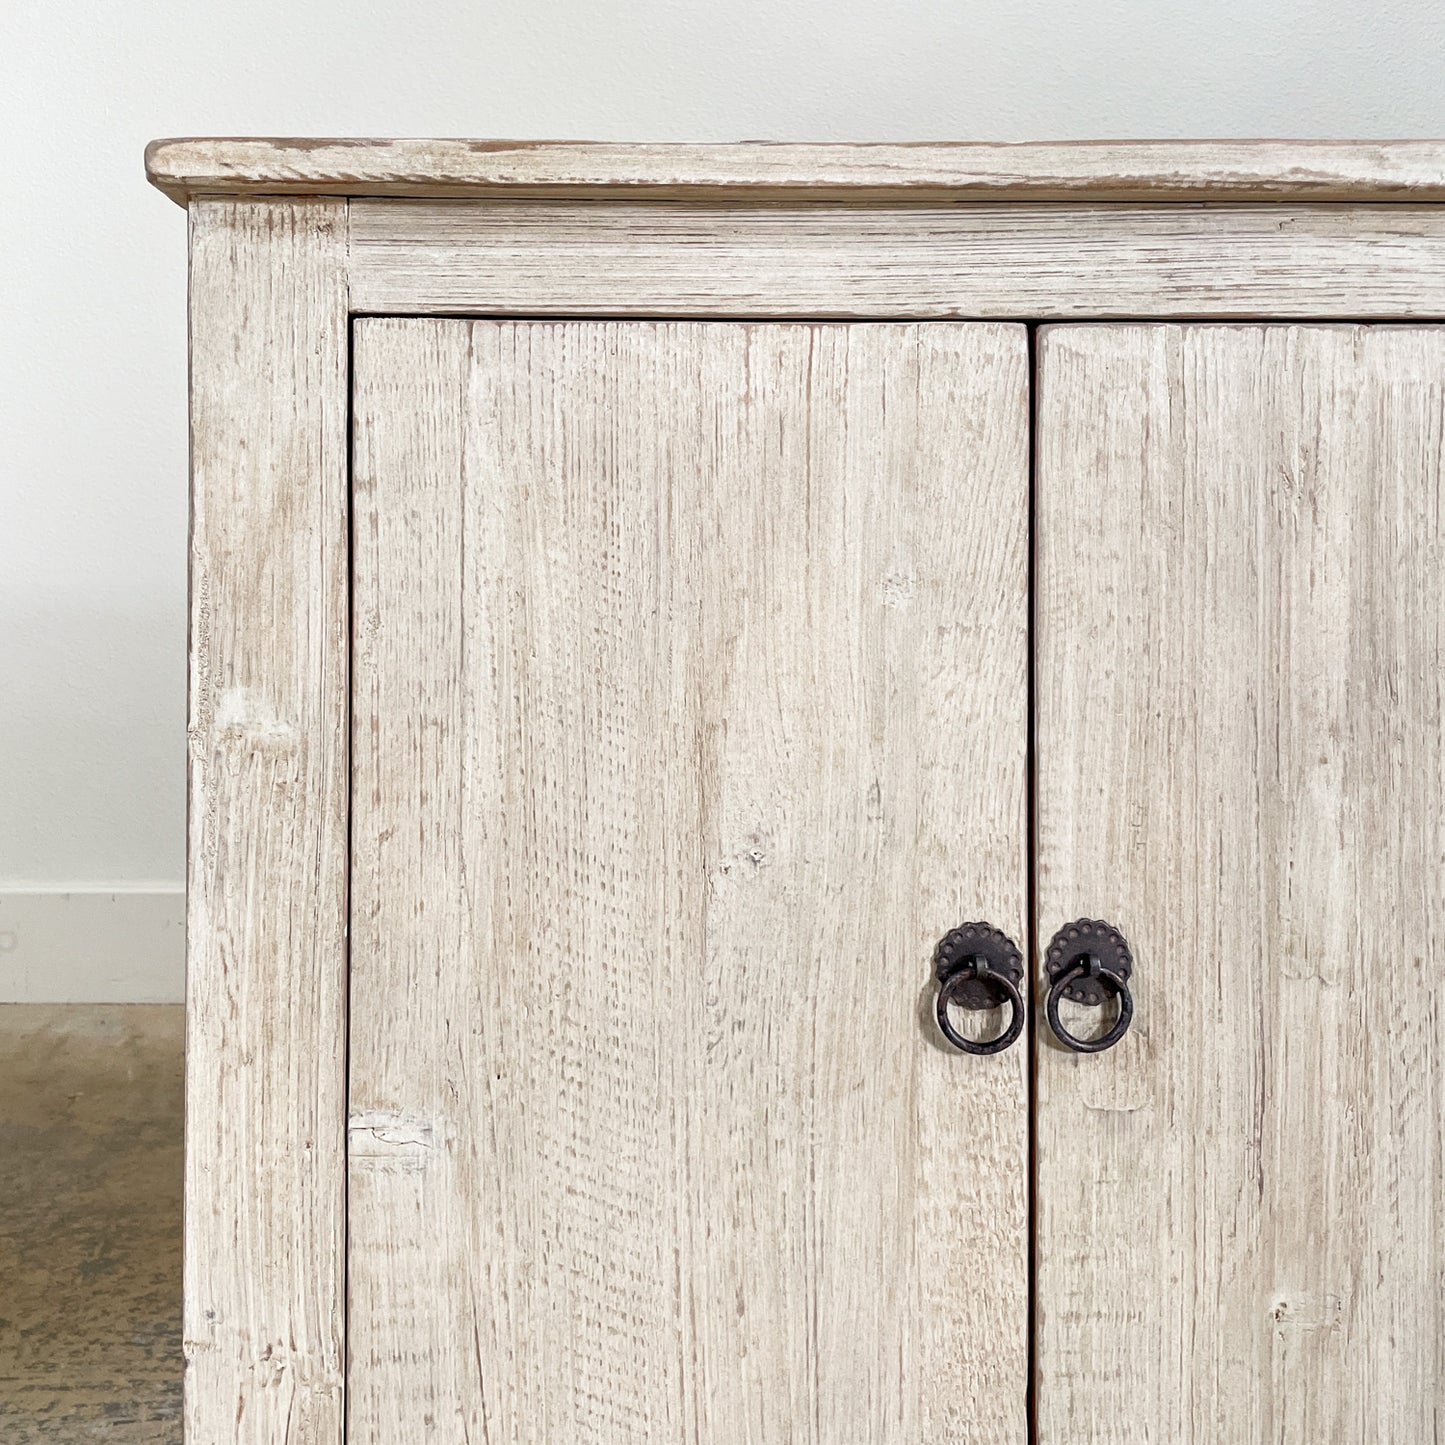 Reclaimed Pine with 6 Doors Sideboard with a Warm Toned Finish